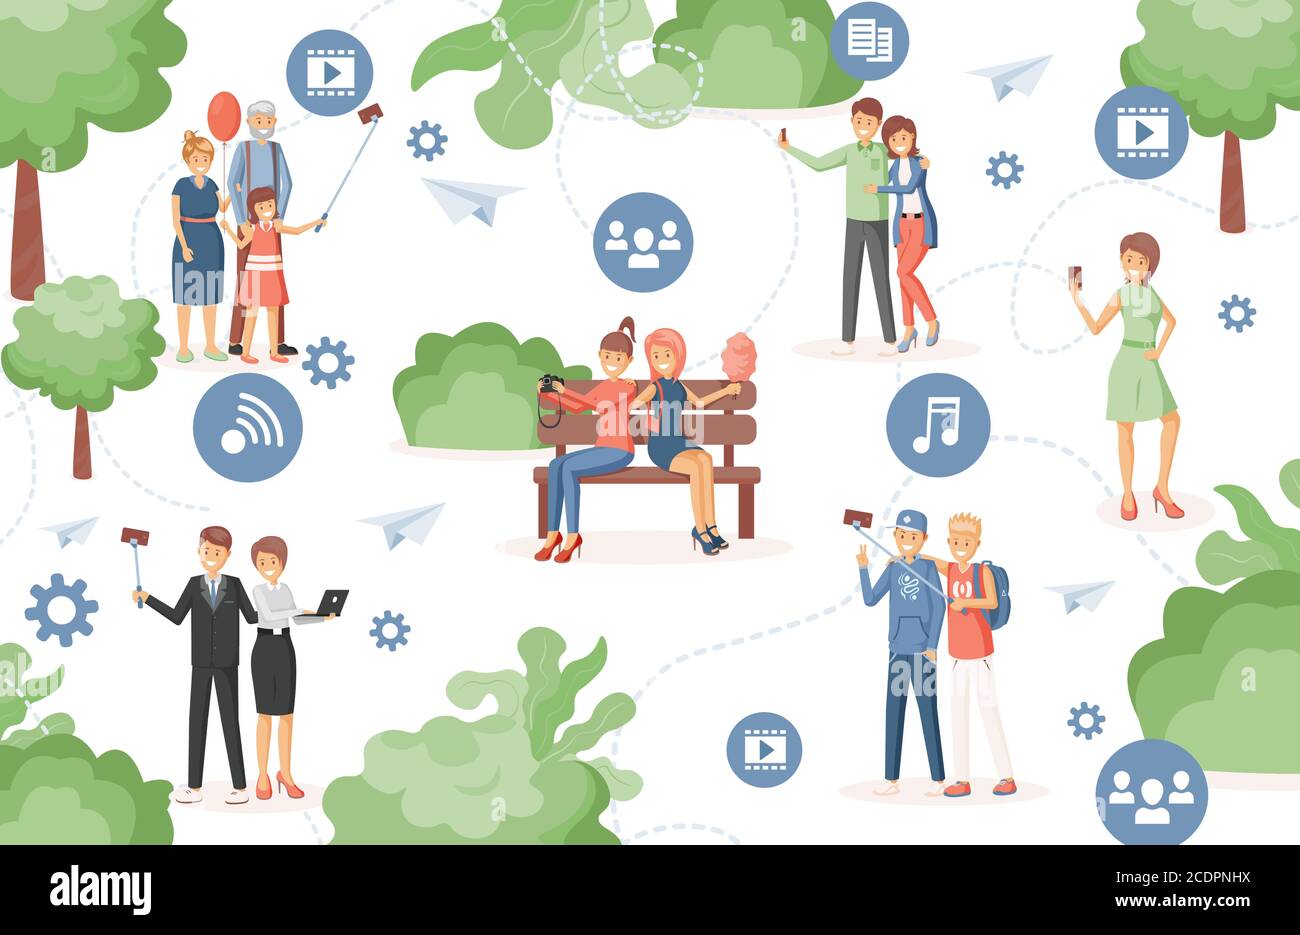 Happy people in city park using wireless internet technology to listen to music, watch videos, sharing files to each other vector flat illustration. Smart city, high speed connection concept. Stock Vector